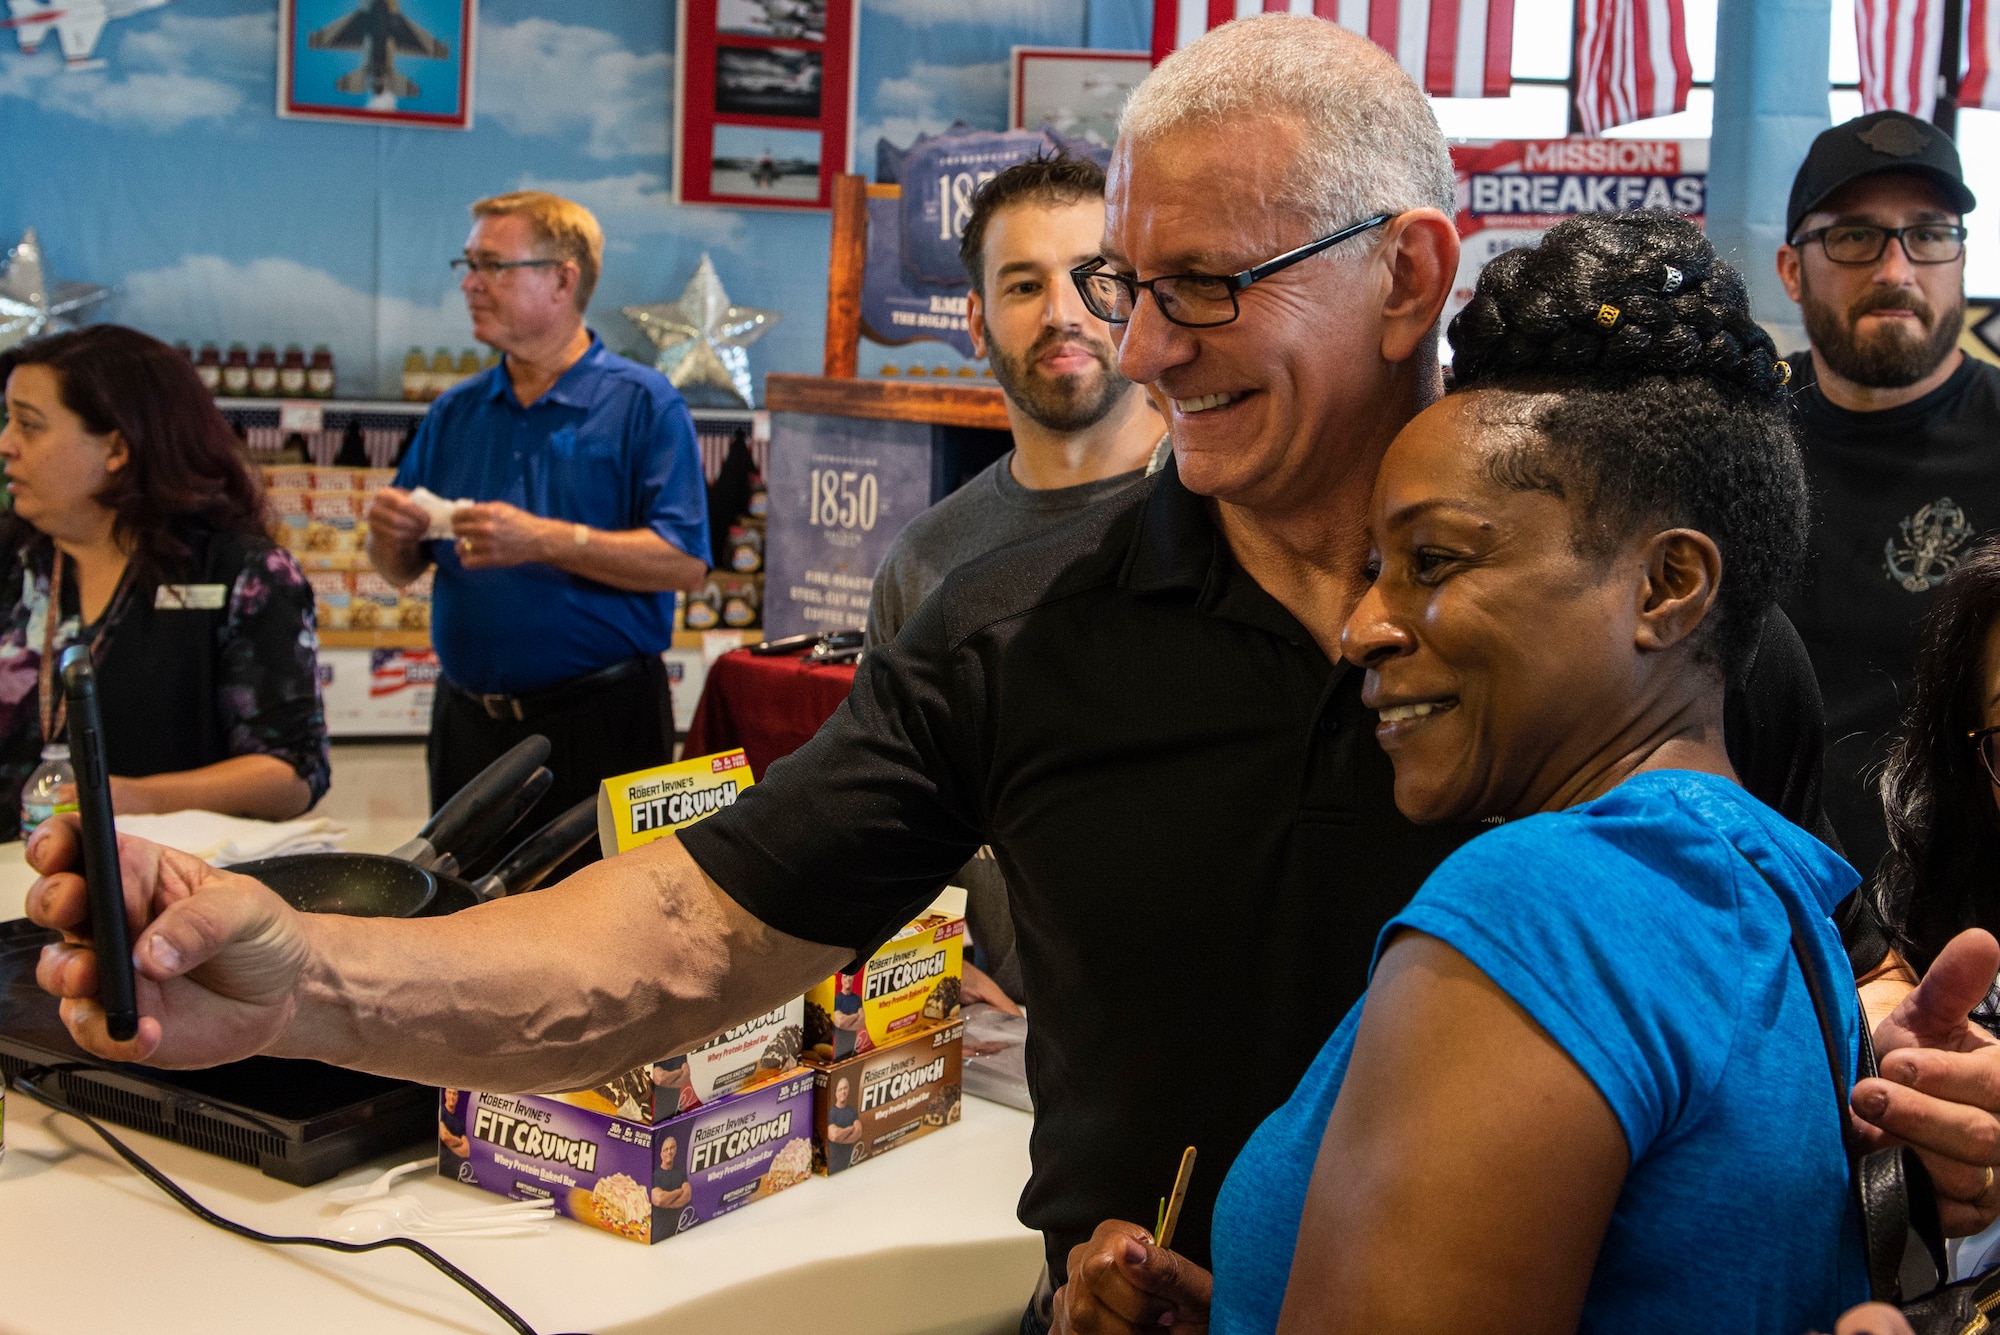 Celebrity Chef Robert Irvine poses for a photo with a commissary patron during his visit to the Nellis Commissary on Nellis Air Force Base, Nev., July 19, 2019.